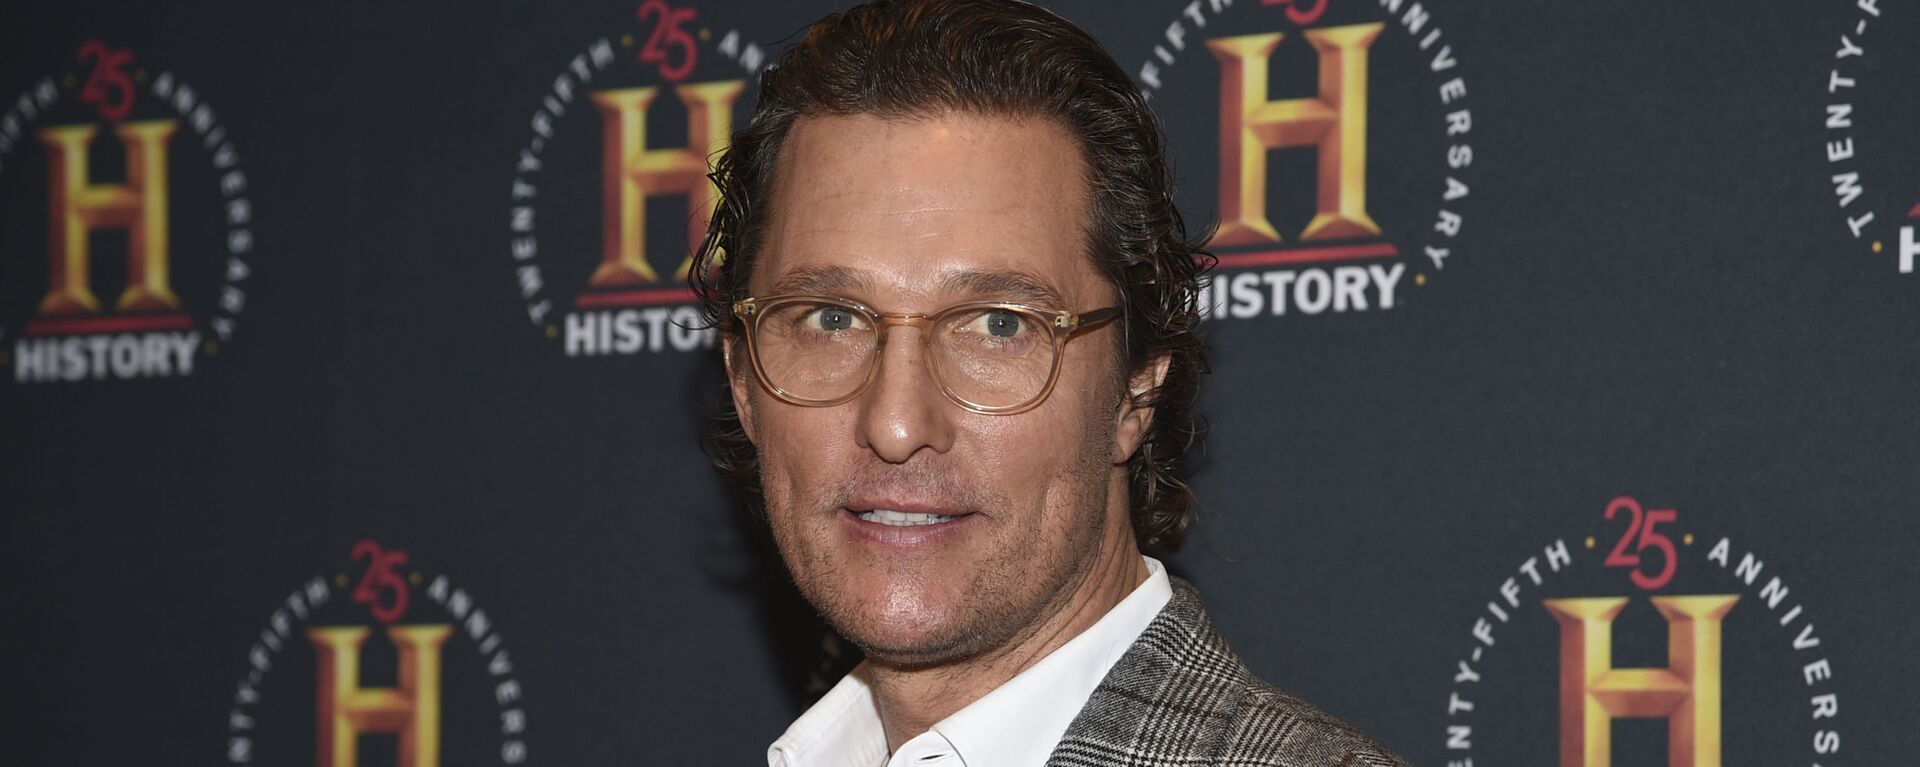 Actor Matthew McConaughey attends A+E Network's HISTORYTalks: Leadership and Legacy at Carnegie Hall on Saturday, Feb. 29, 2020, in New York - Sputnik International, 1920, 05.07.2021